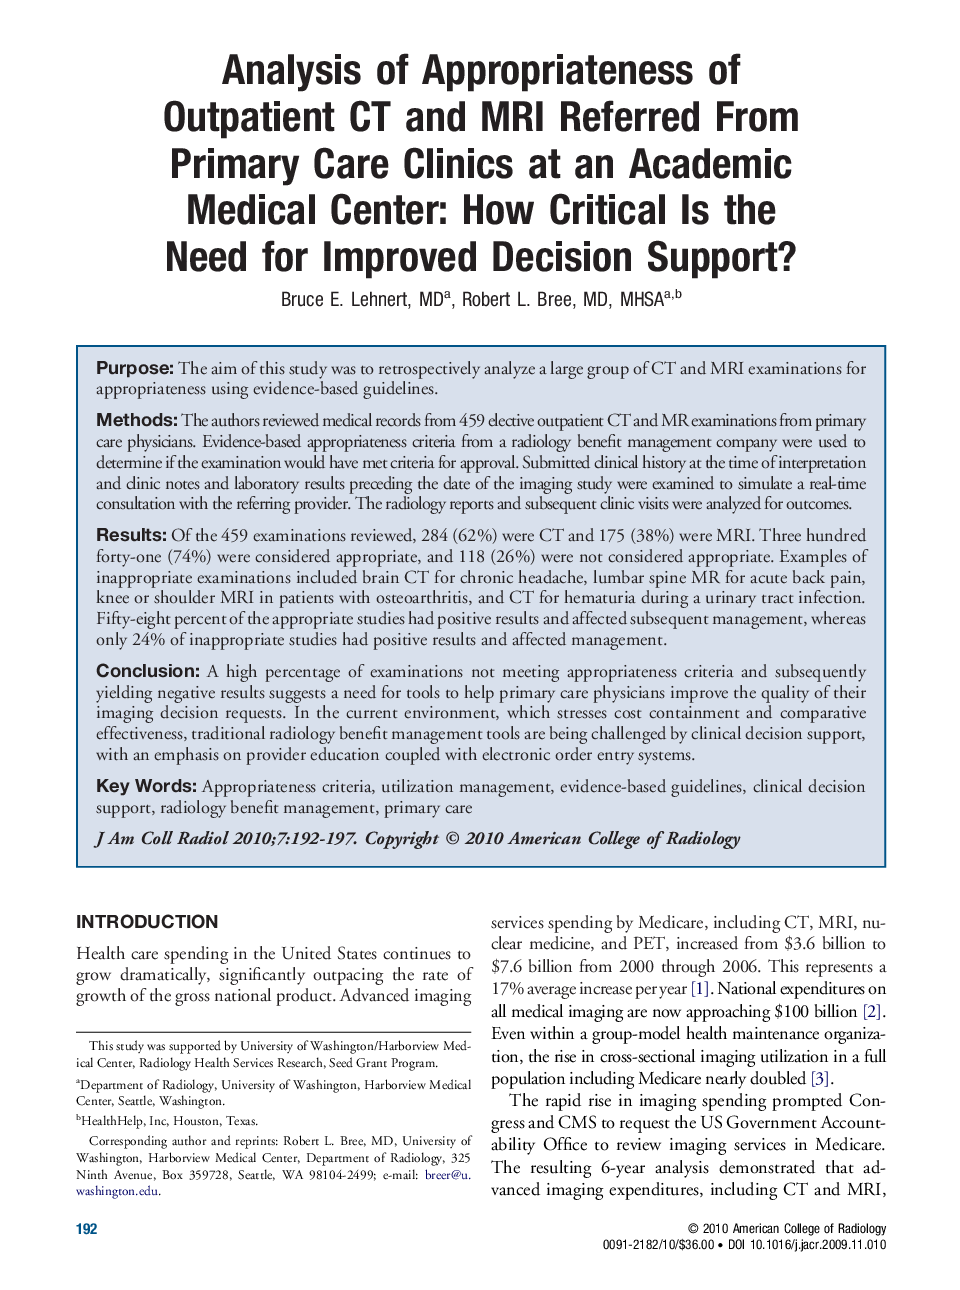 Analysis of Appropriateness of Outpatient CT and MRI Referred From Primary Care Clinics at an Academic Medical Center: How Critical Is the Need for Improved Decision Support?